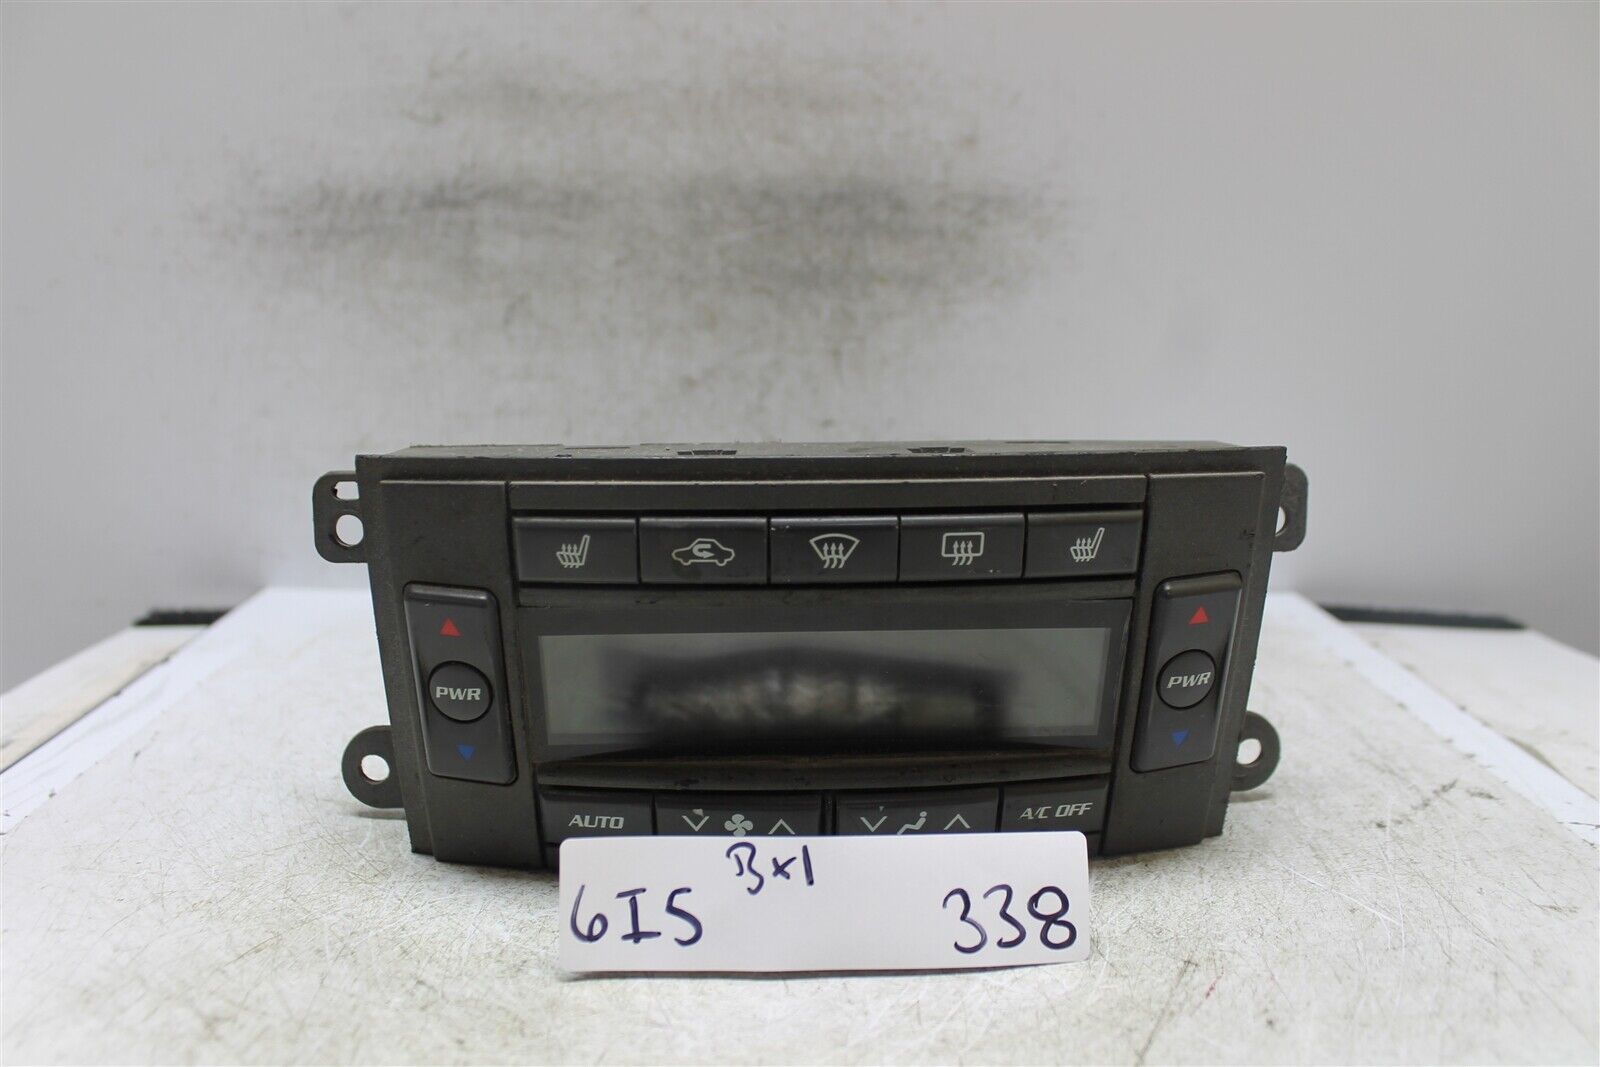 Primary image for 2003-2006 Cadillac STS AC Heat Climate Temp. Control 25743625 OEM 338 6i5-B1